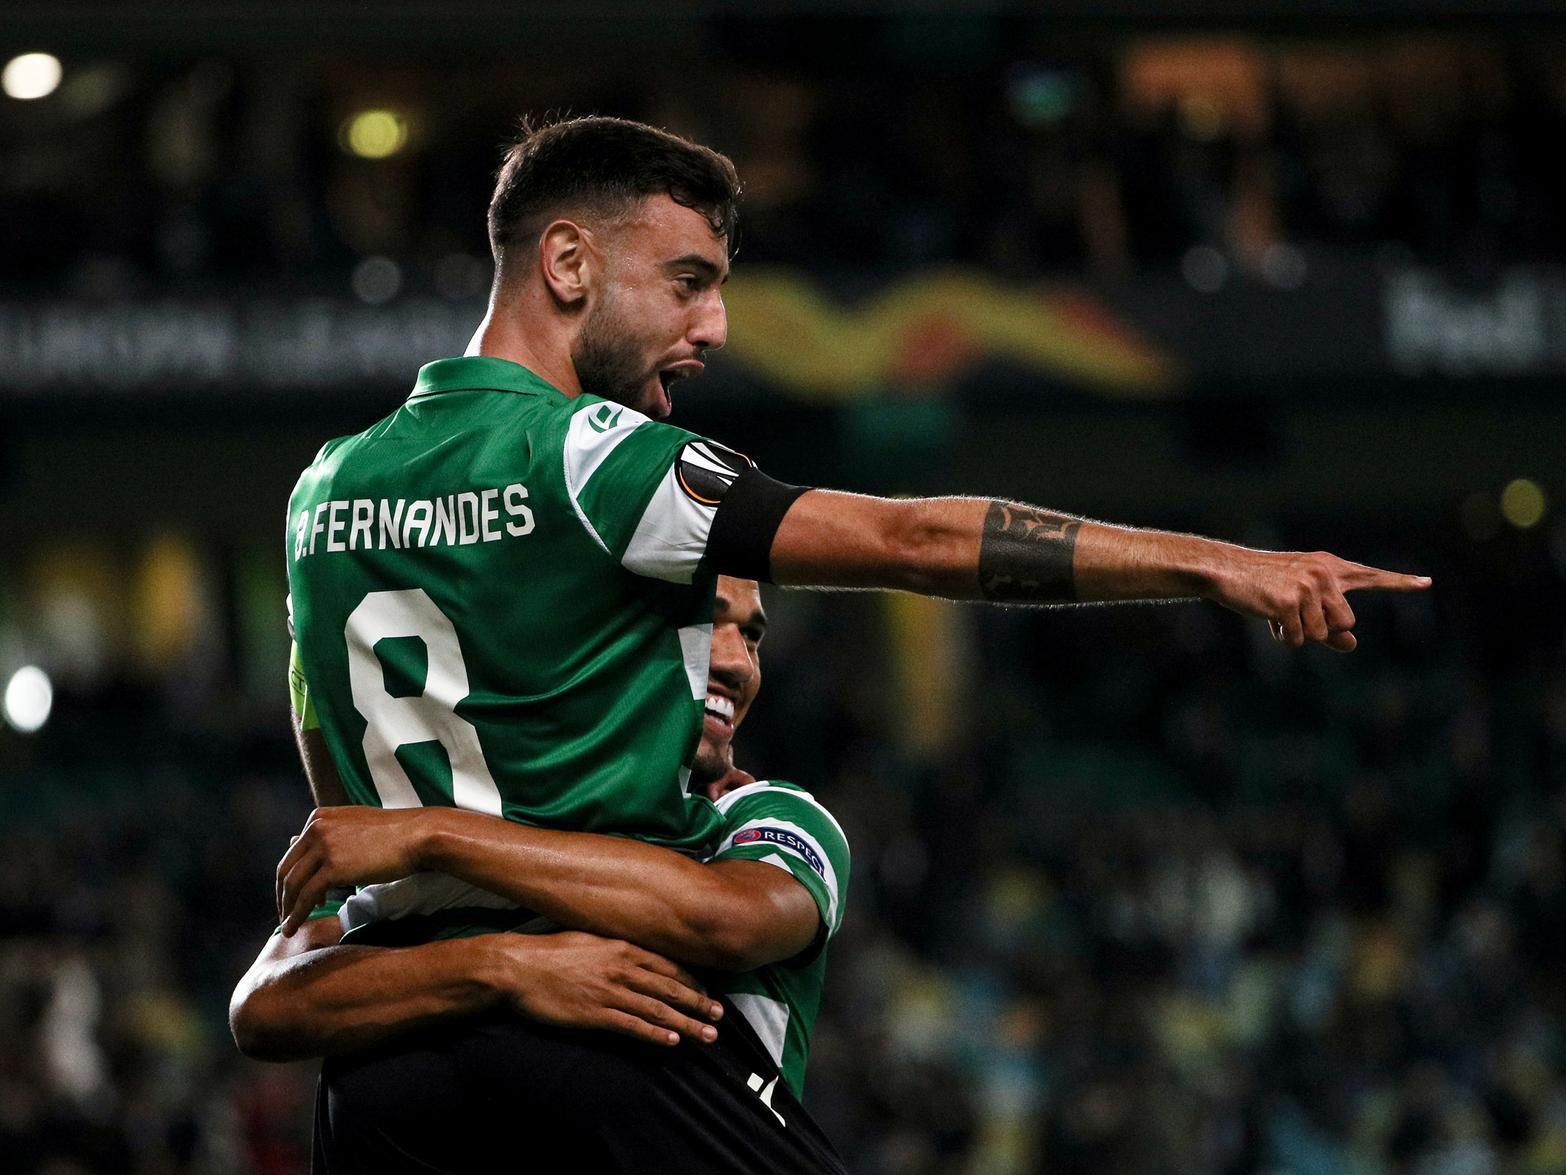 It seems like Manchester United fans just might be keen on signing Sporting CP's Bruno Fernandes, but that's a mere hunch. In all seriousness, United are desperate to sign him, and they probably will at great expense.